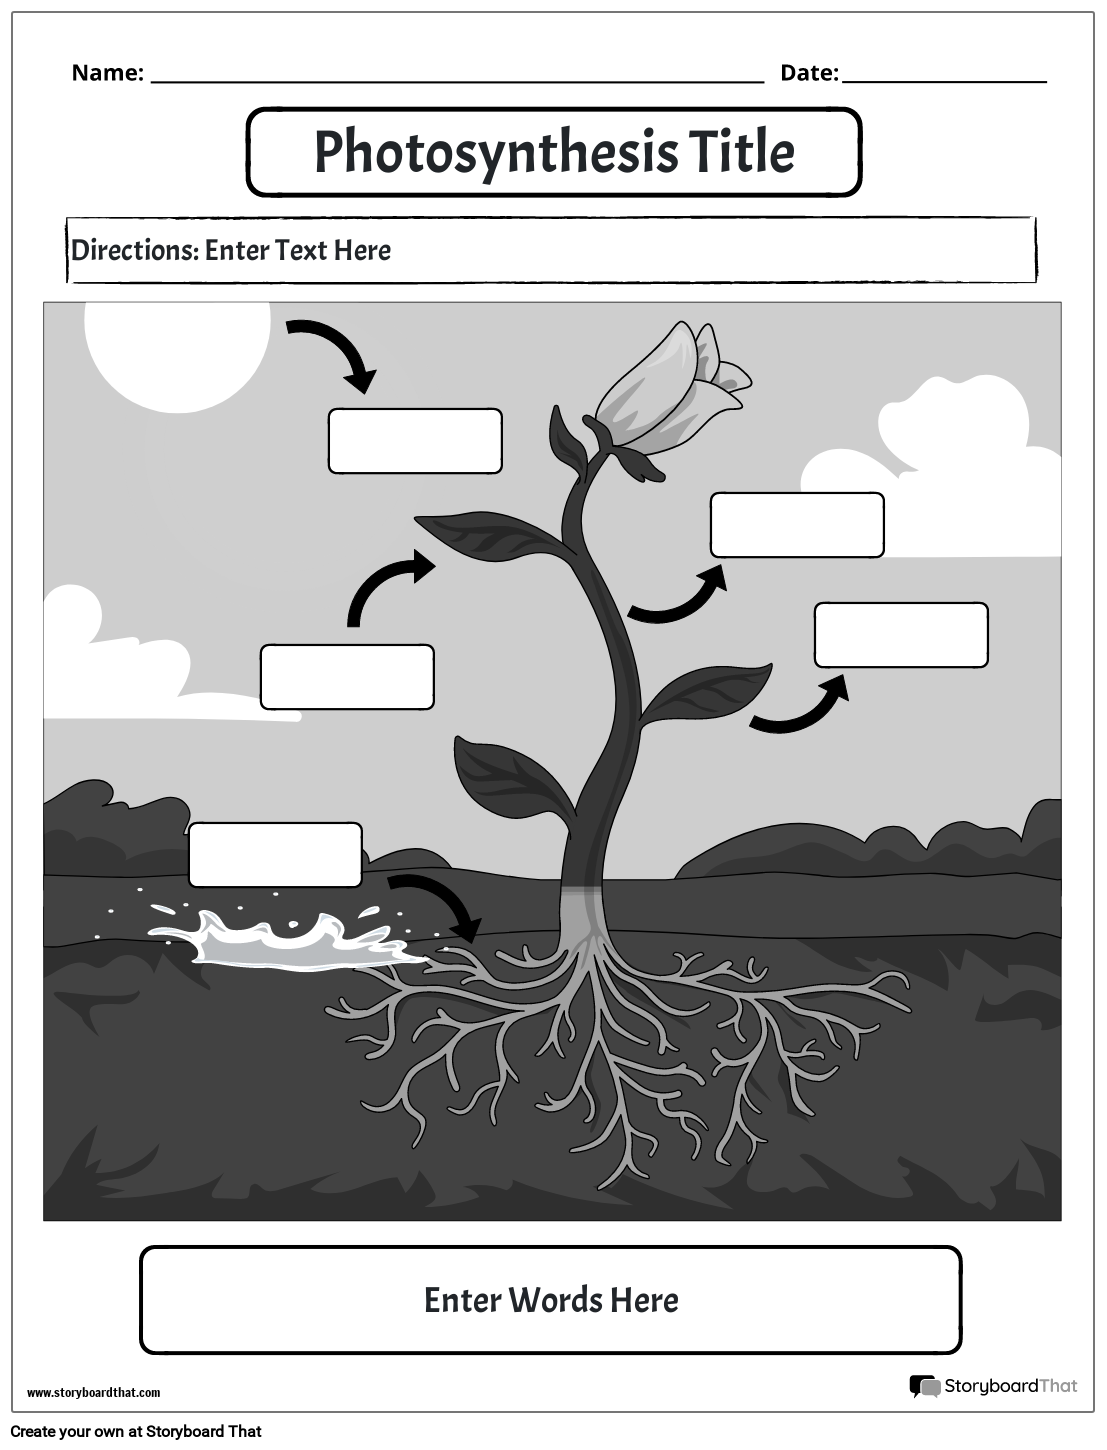 free-photosynthesis-worksheets-learn-cellular-respiration